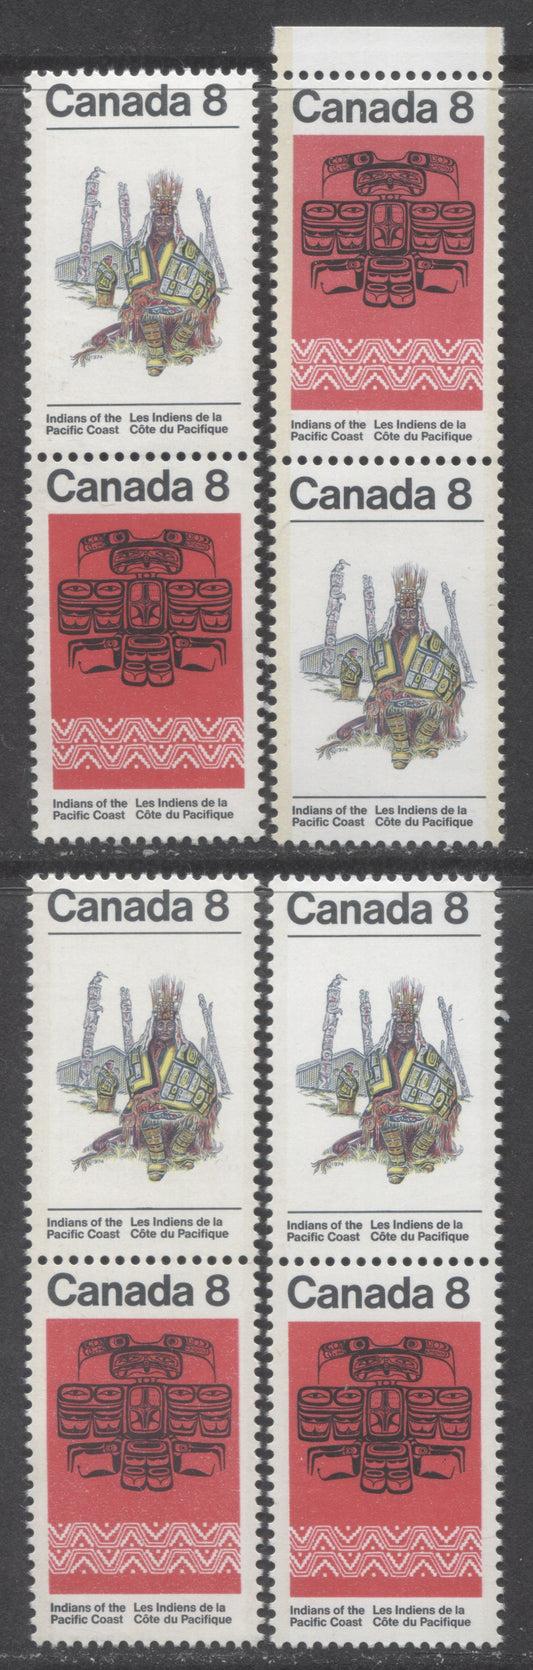 Lot 88 Canada #573a 8c Multicolored Inside Of A Nootka & Pacific Coast Artifacts, 1974 Indians Issue, 4 VFNH Vertical Pairs On Various Papers